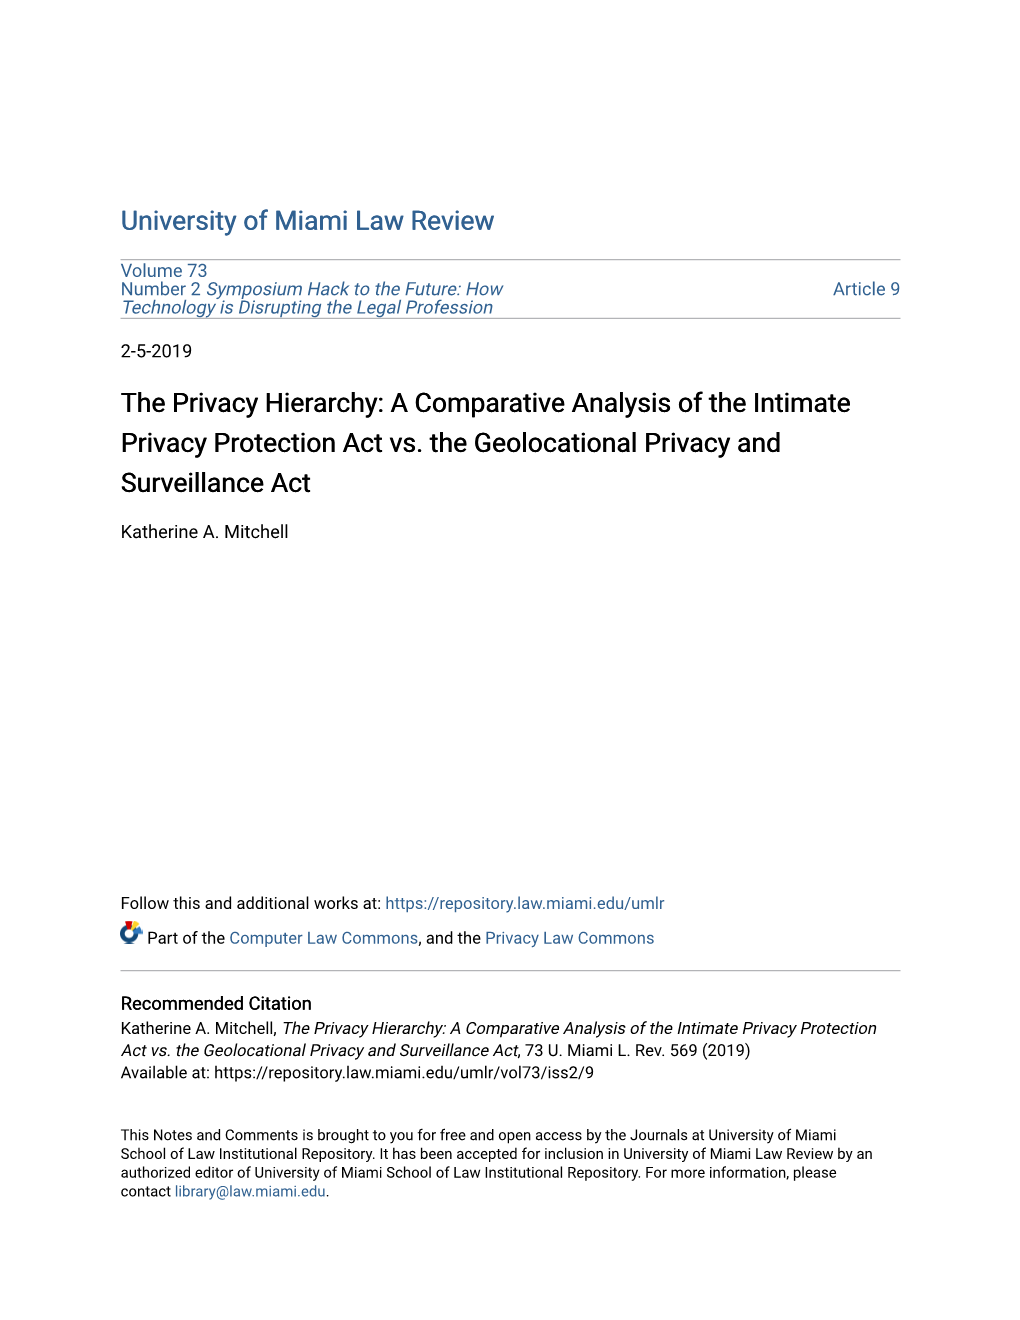 A Comparative Analysis of the Intimate Privacy Protection Act Vs. the Geolocational Privacy and Surveillance Act